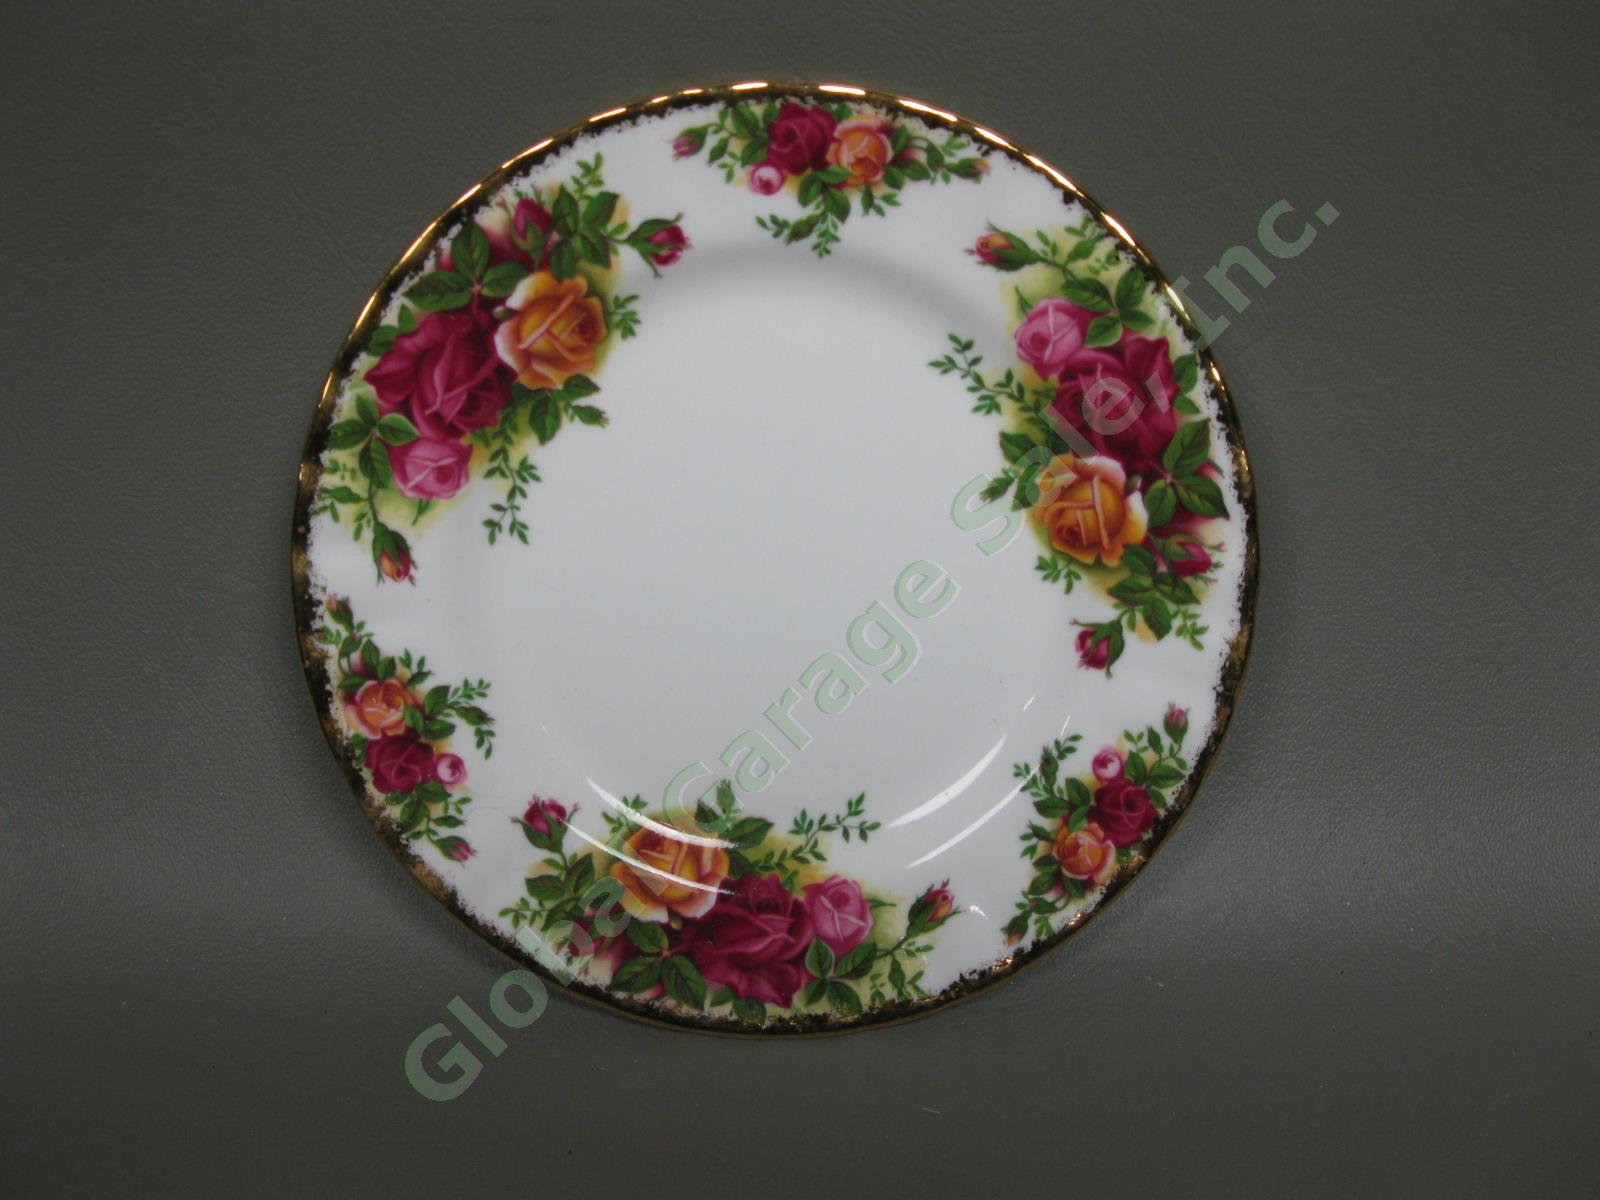 4 Royal Albert Old Country Roses Place Settings Serving Bowl Platter Plate Set 14